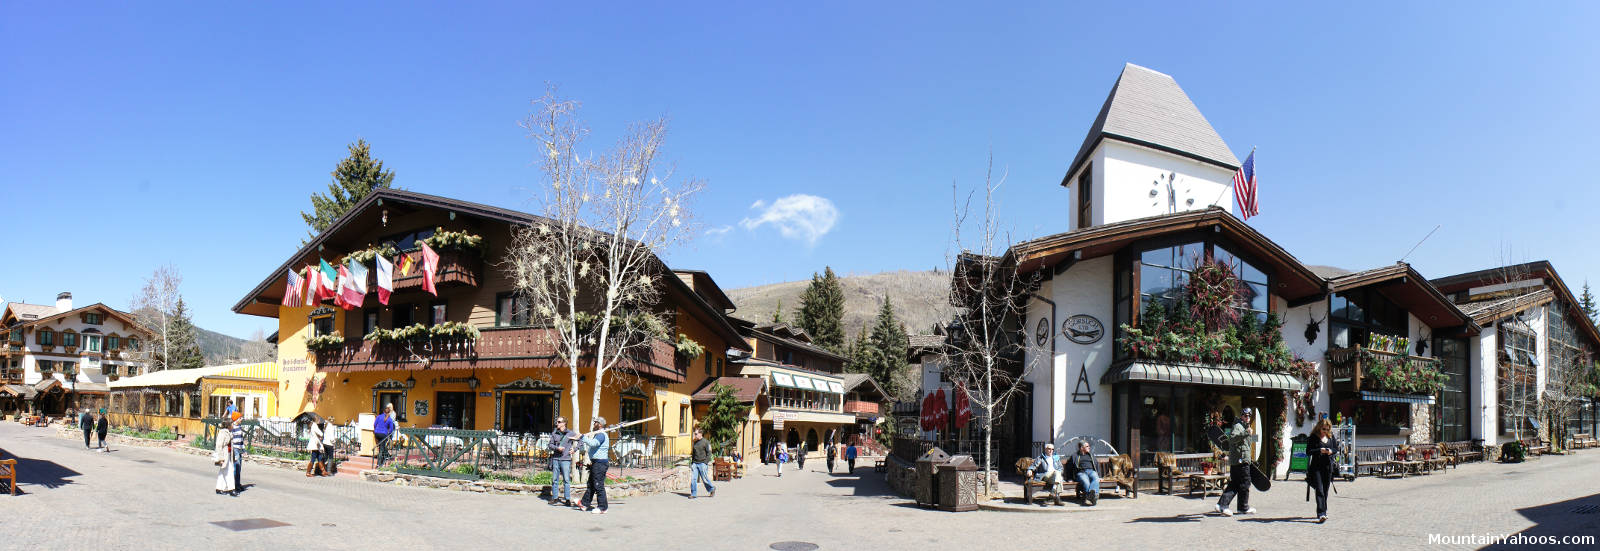 View of Vail Village